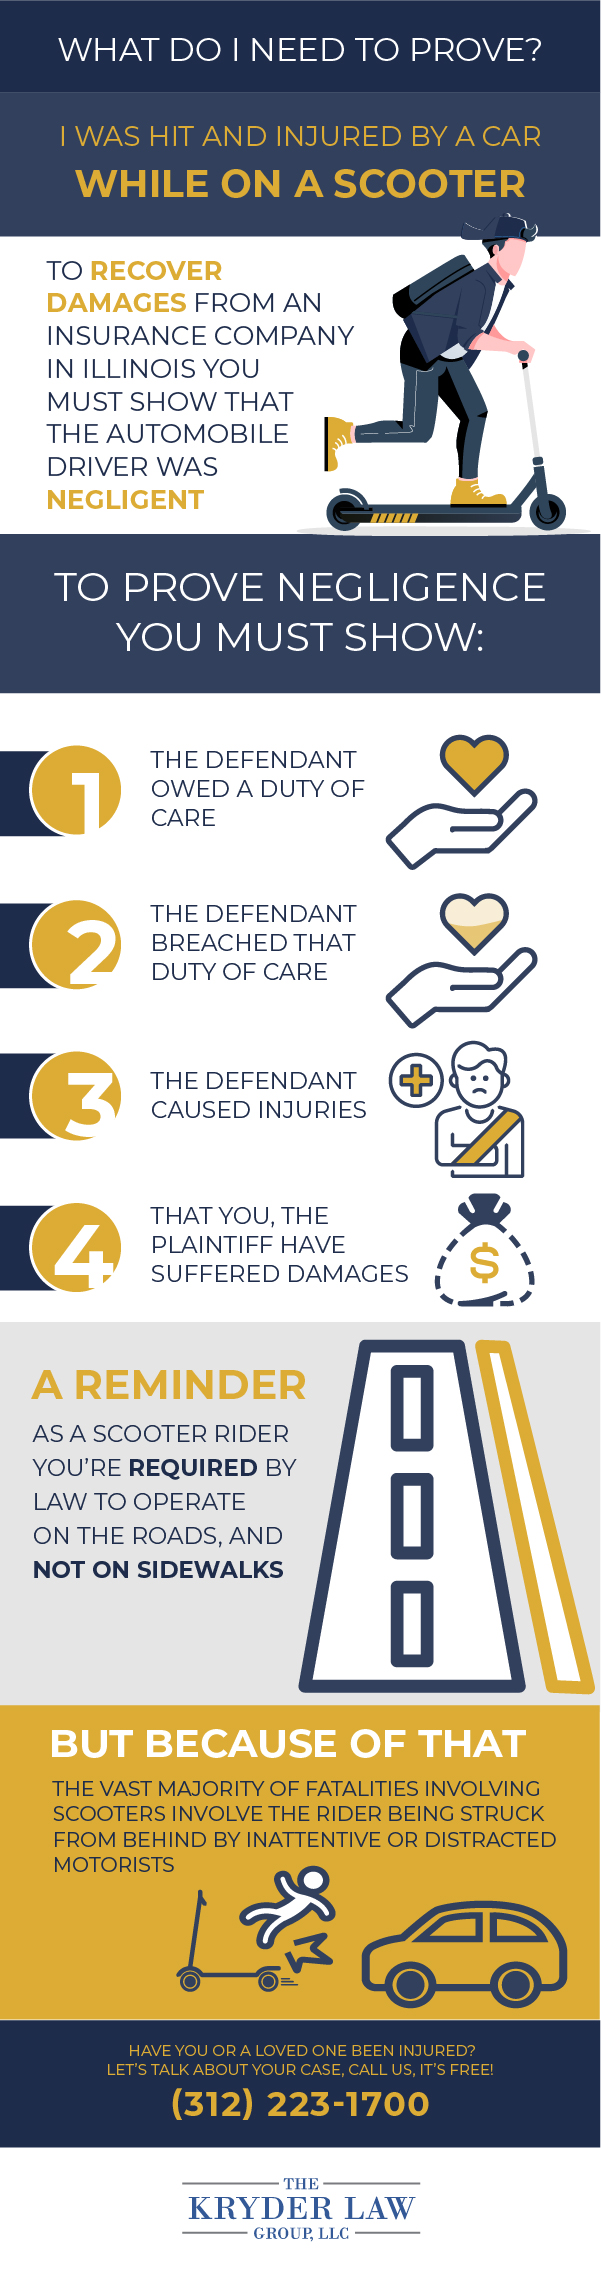 Bird & Lime Scooter Injury Lawsuits Infographic